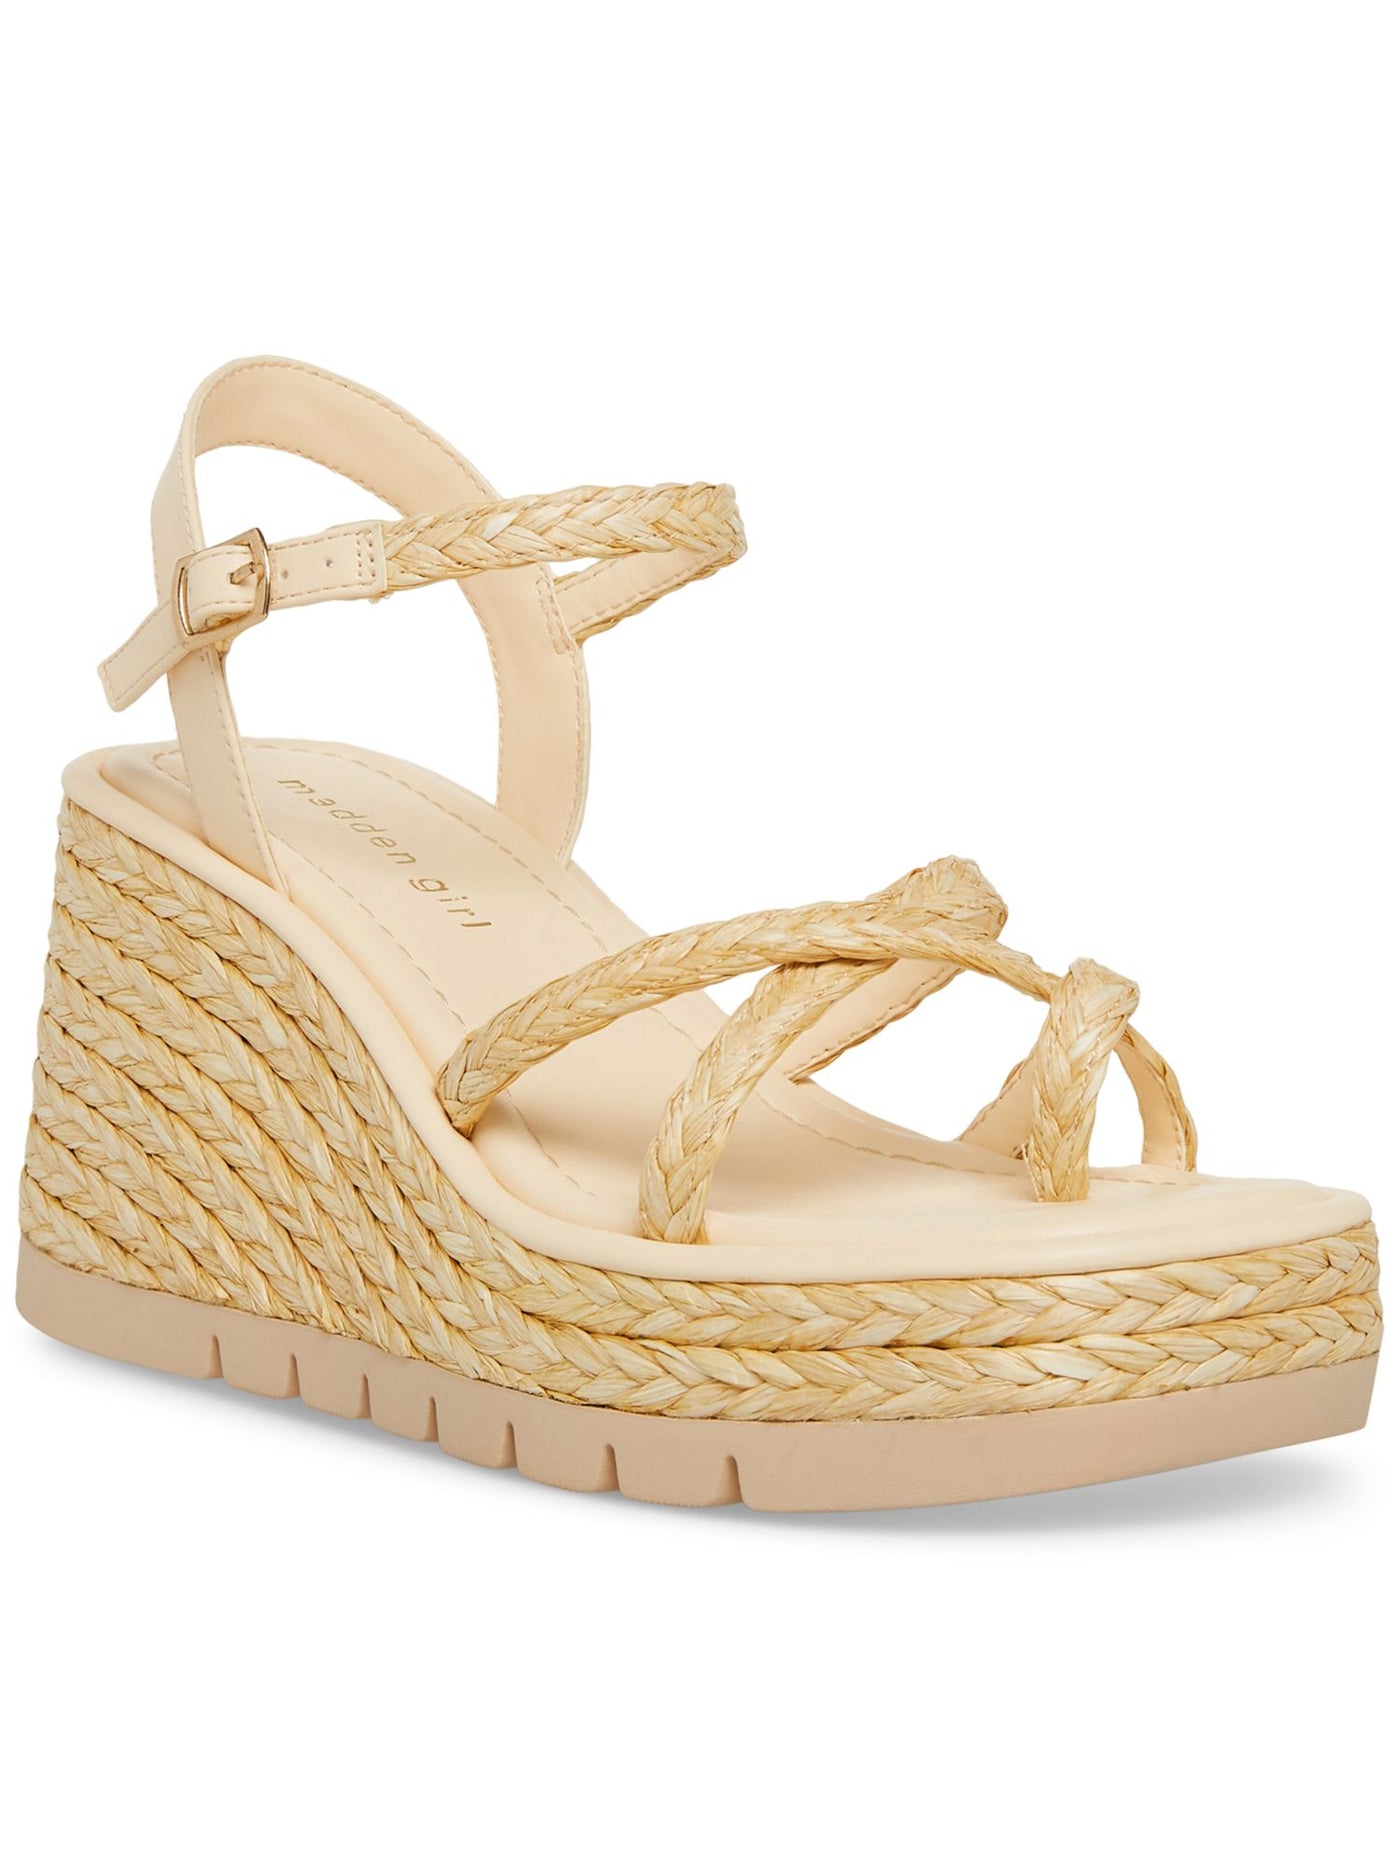 MADDEN GIRL Womens Beige Mixed Media 1-1/2" Platform Crisscross Straps Padded Ankle Strap Lug Sole Vault Square Toe Wedge Buckle Espadrille Shoes 10 M